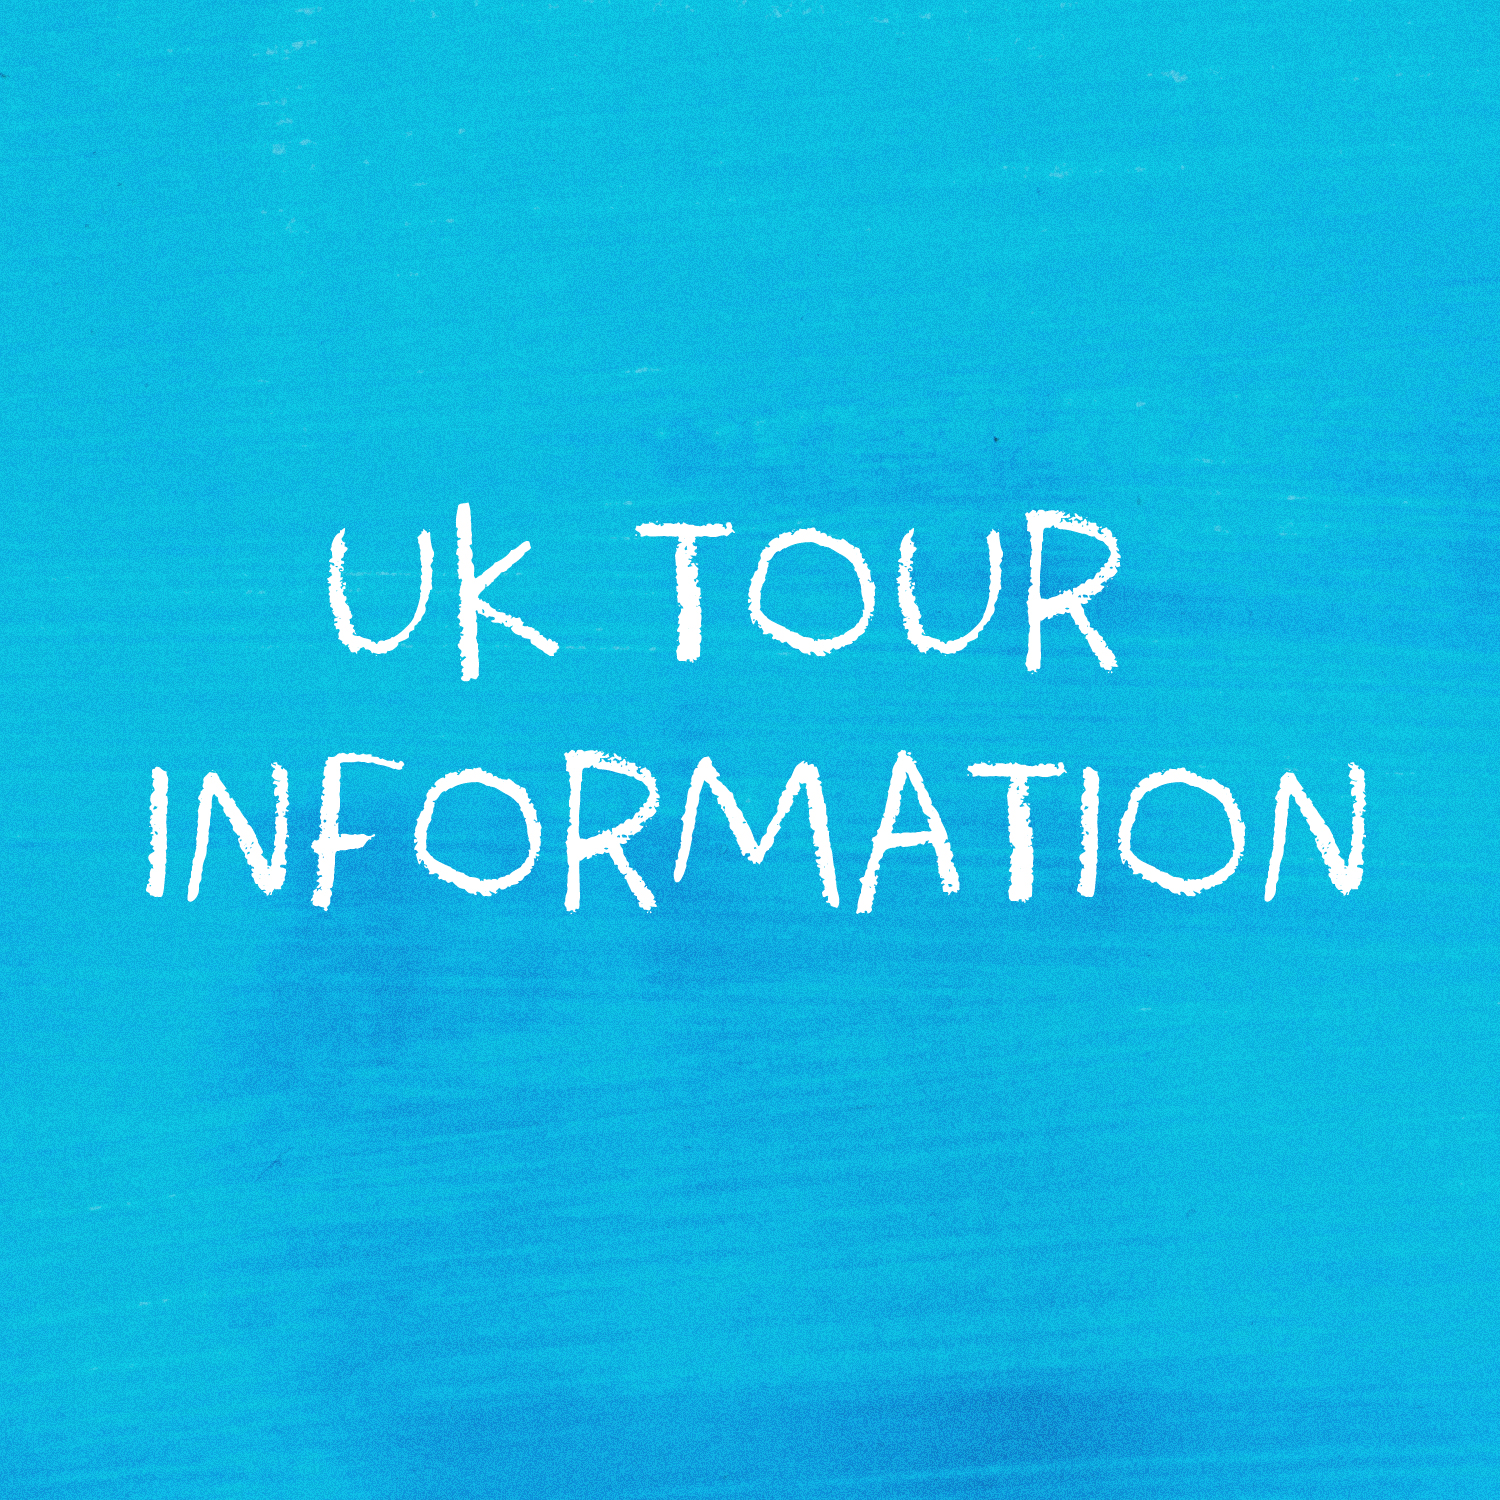 Important Information About Fraudulent UK Tour Tickets